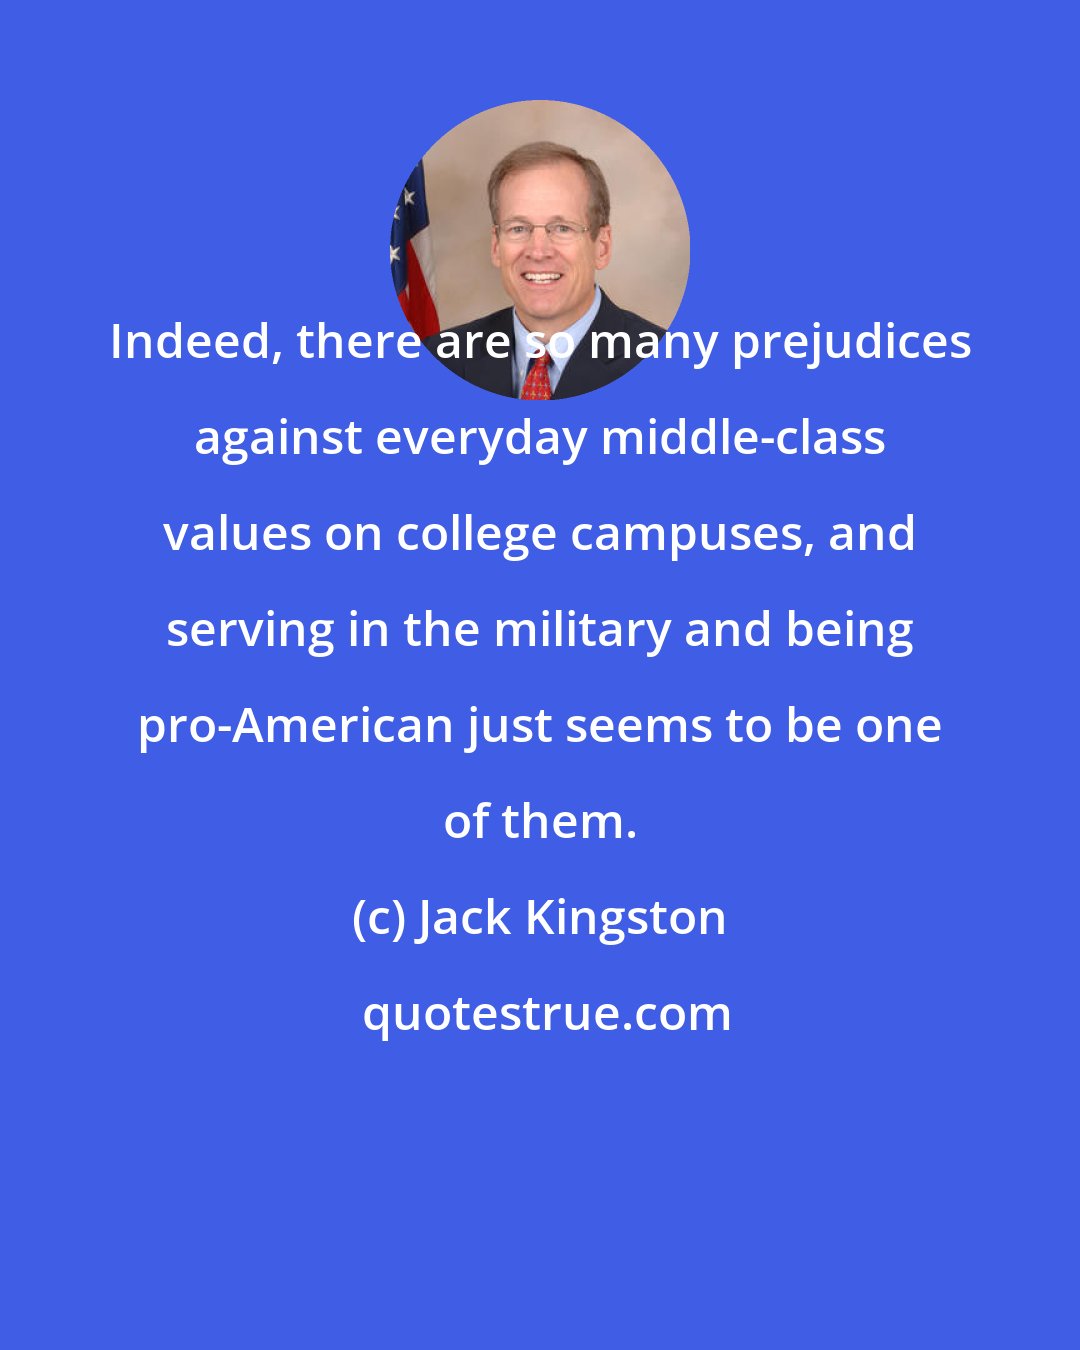 Jack Kingston: Indeed, there are so many prejudices against everyday middle-class values on college campuses, and serving in the military and being pro-American just seems to be one of them.